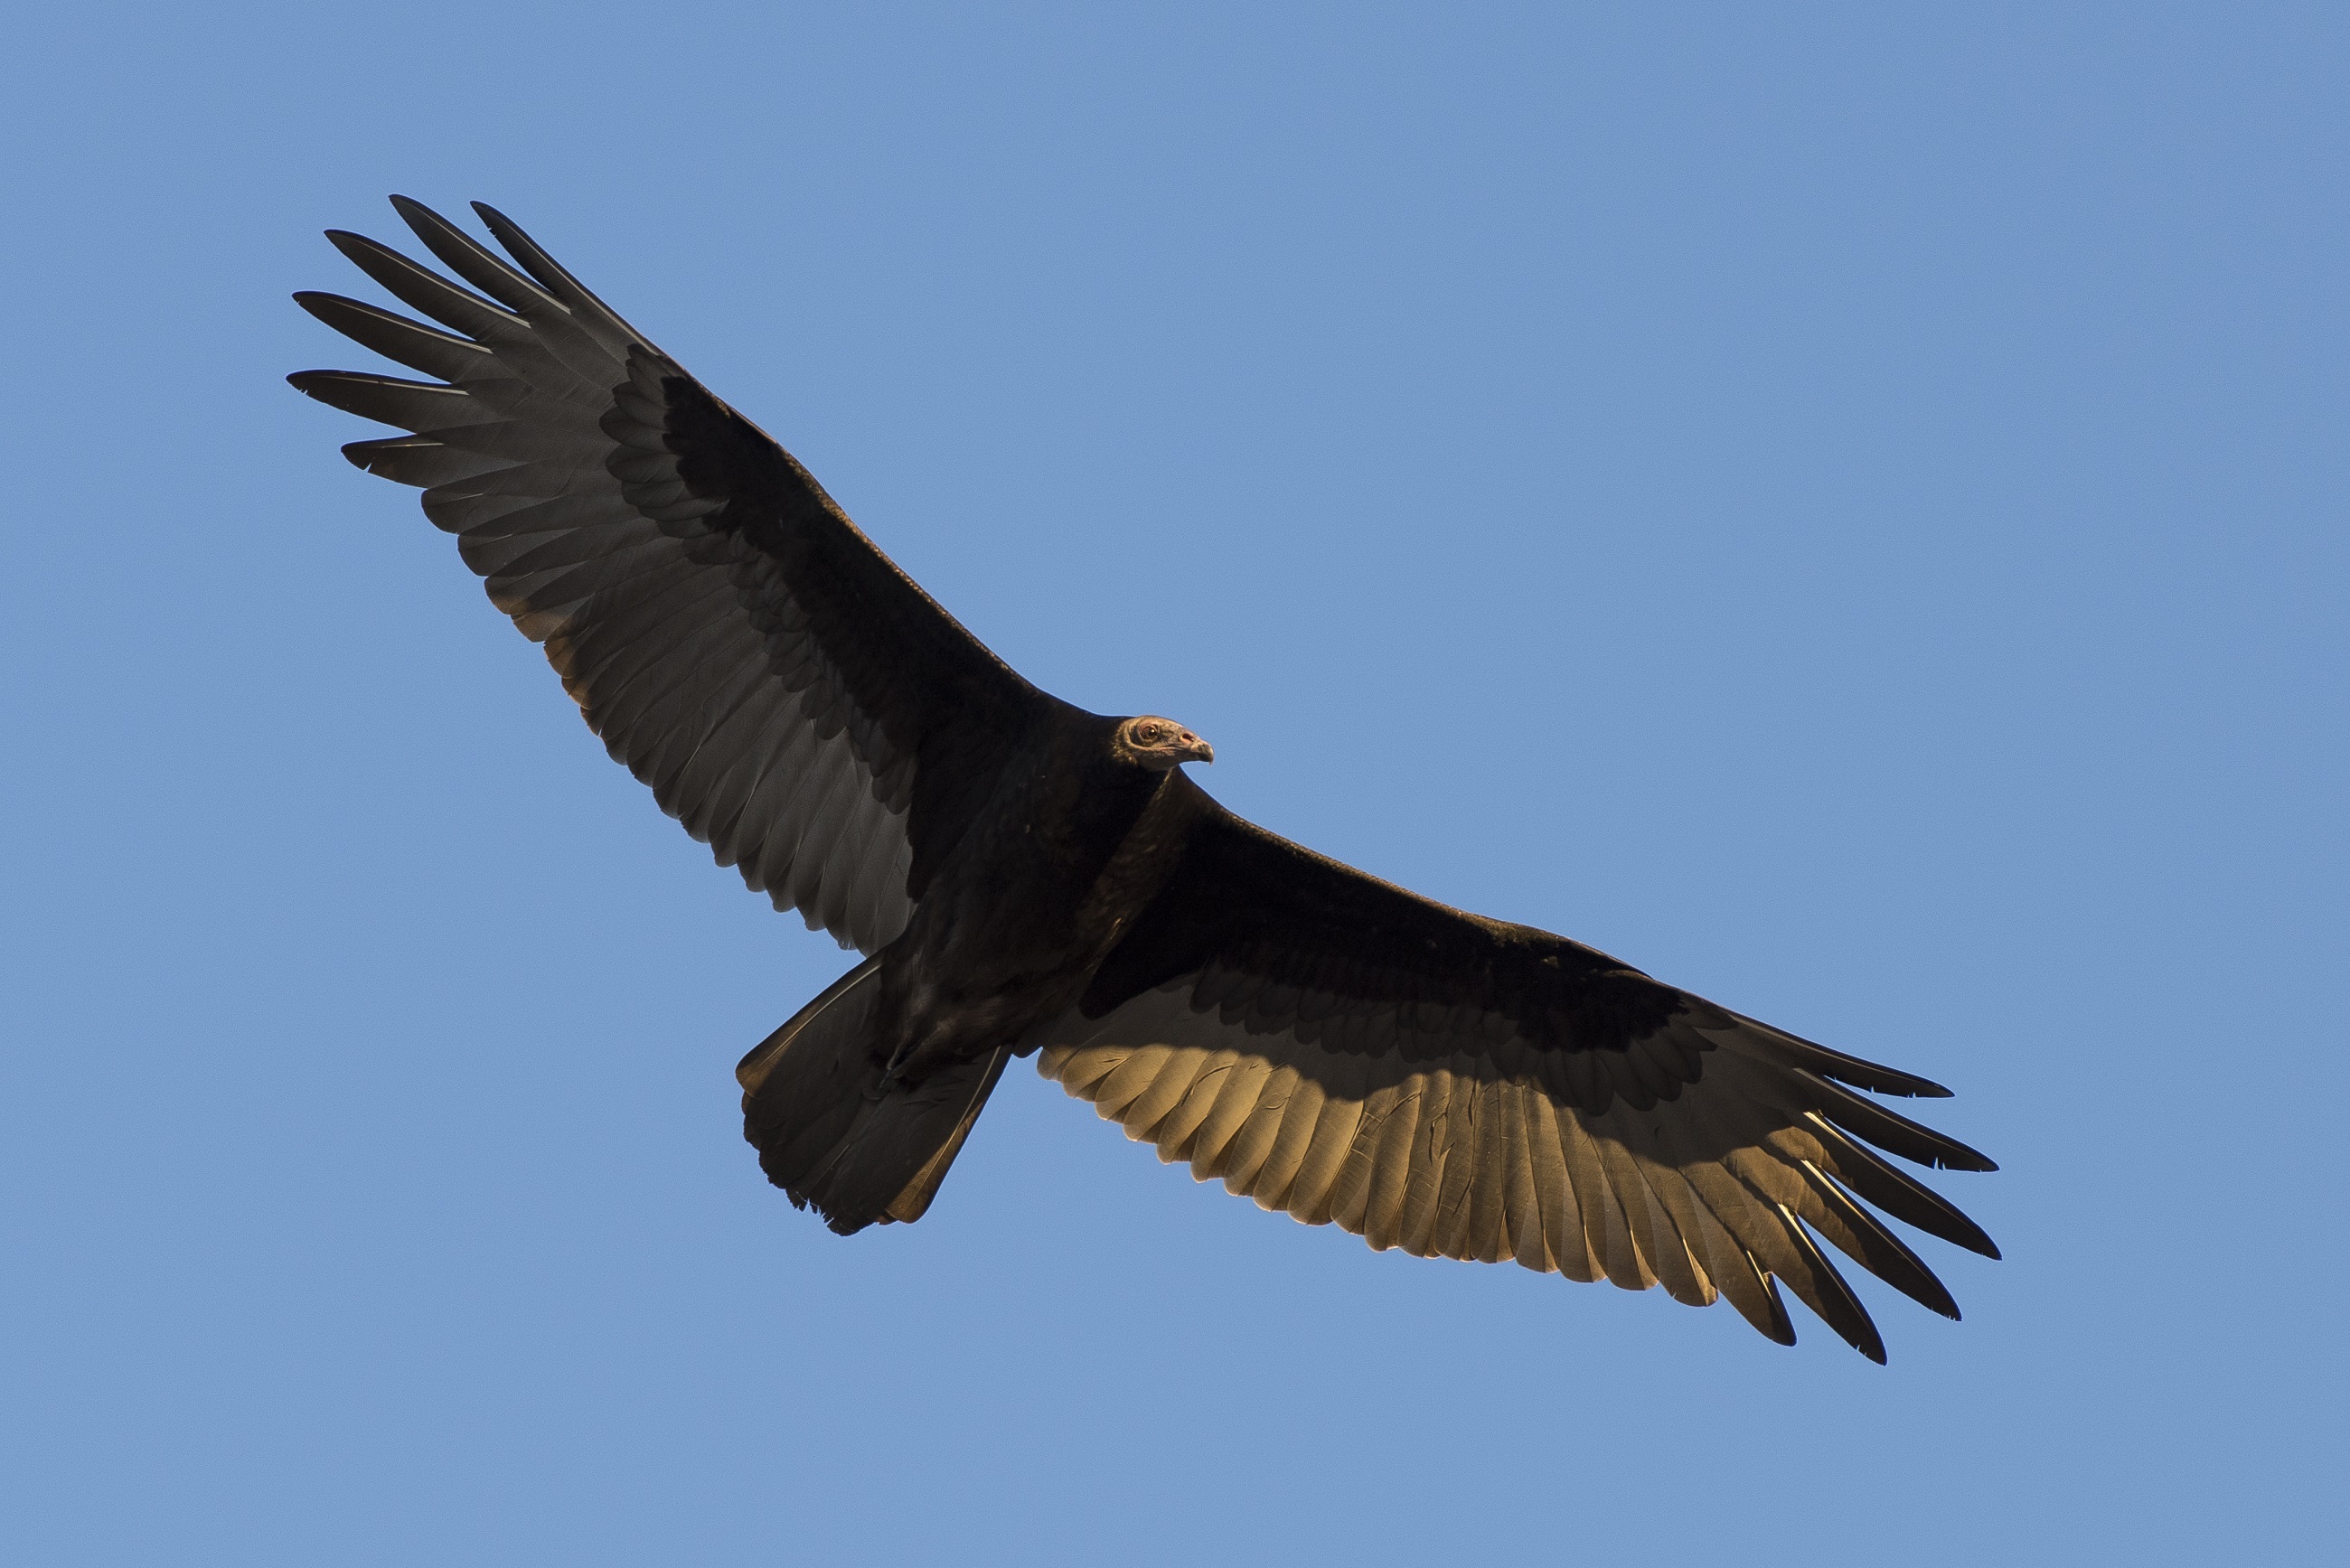 Turkey Vulture soaring high in the sky by skeeze